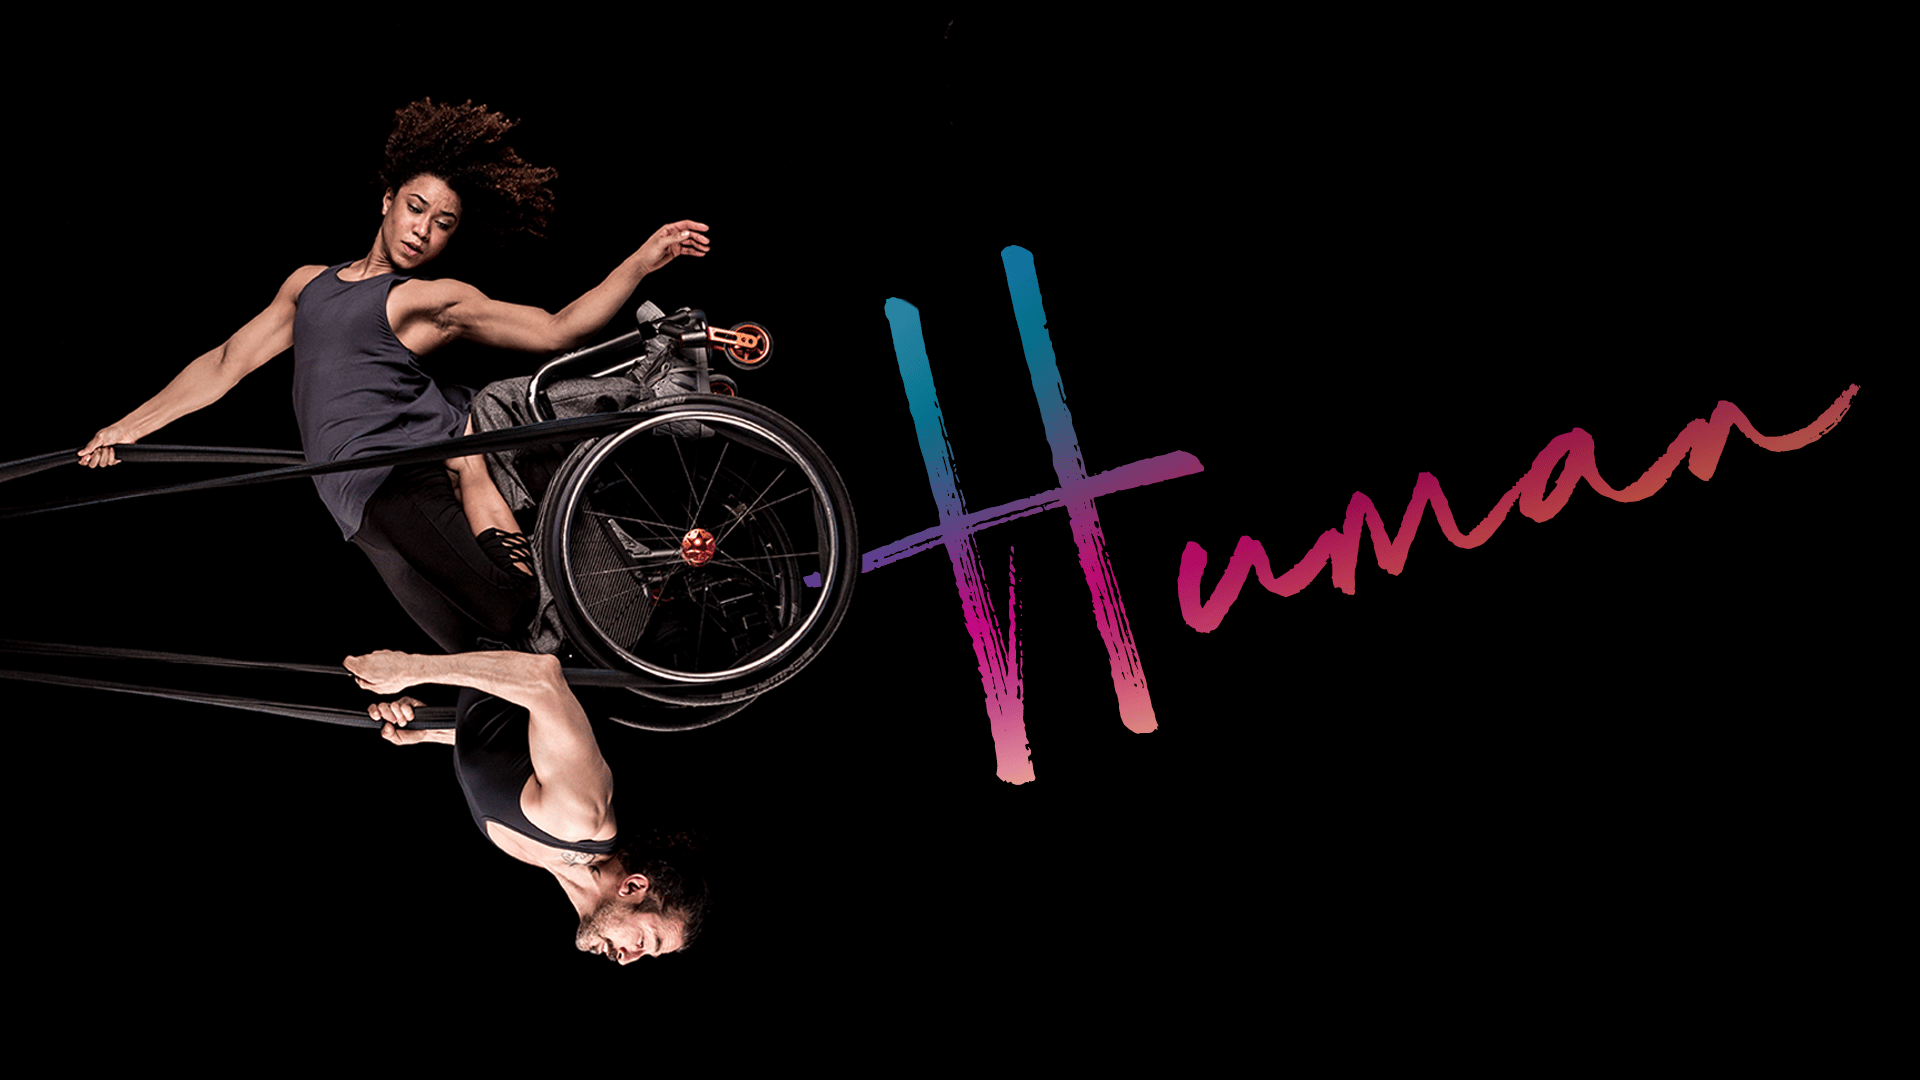 Human Artwork - two performers, one sitting in a wheelchair, swing on an aerial rope against a black background. Text reads: 'Human'.